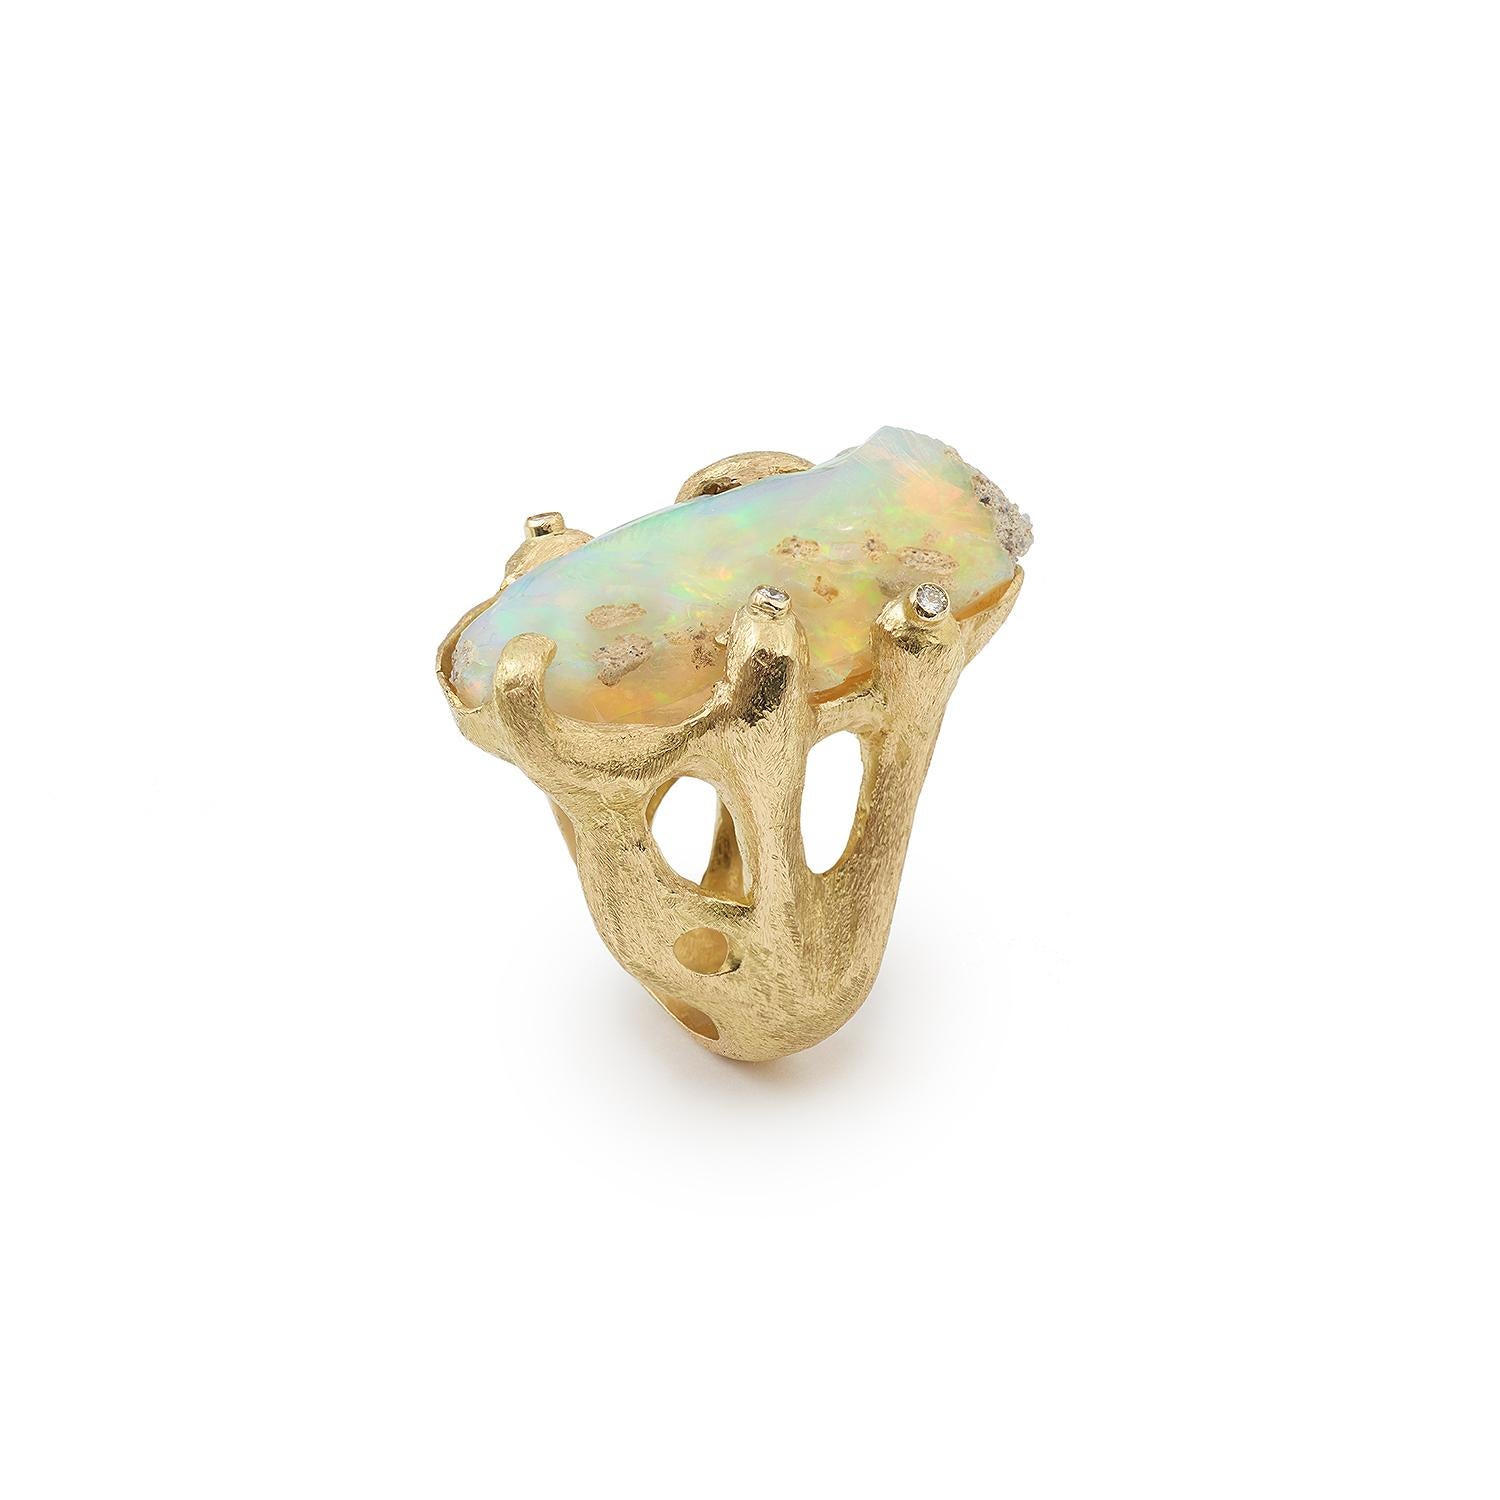 Custom Made One of a kind ring by Les Pierres de Julie.

Ring set with rough Ethiopian opal, three brilliant-cut diamonds and one baguette-cut diamond.

18-carat frosted yellow gold, 750 / 1000th (eagle's head hallmark)

One of a kind piece